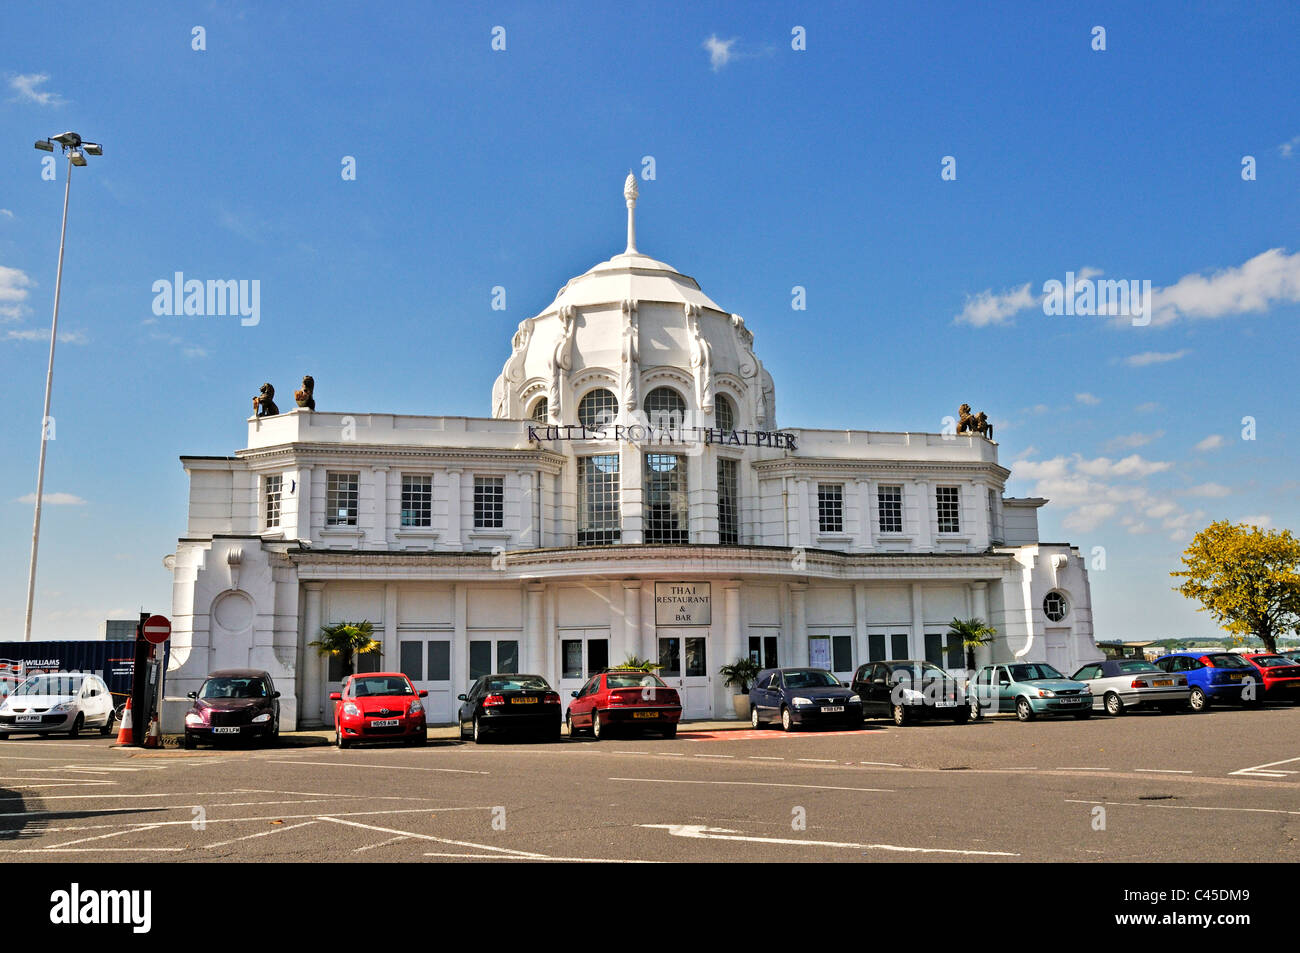 The elegant facade of the Pavilion which was once the main entrance and booking hall into the Royal Pier, Southampton Stock Photo